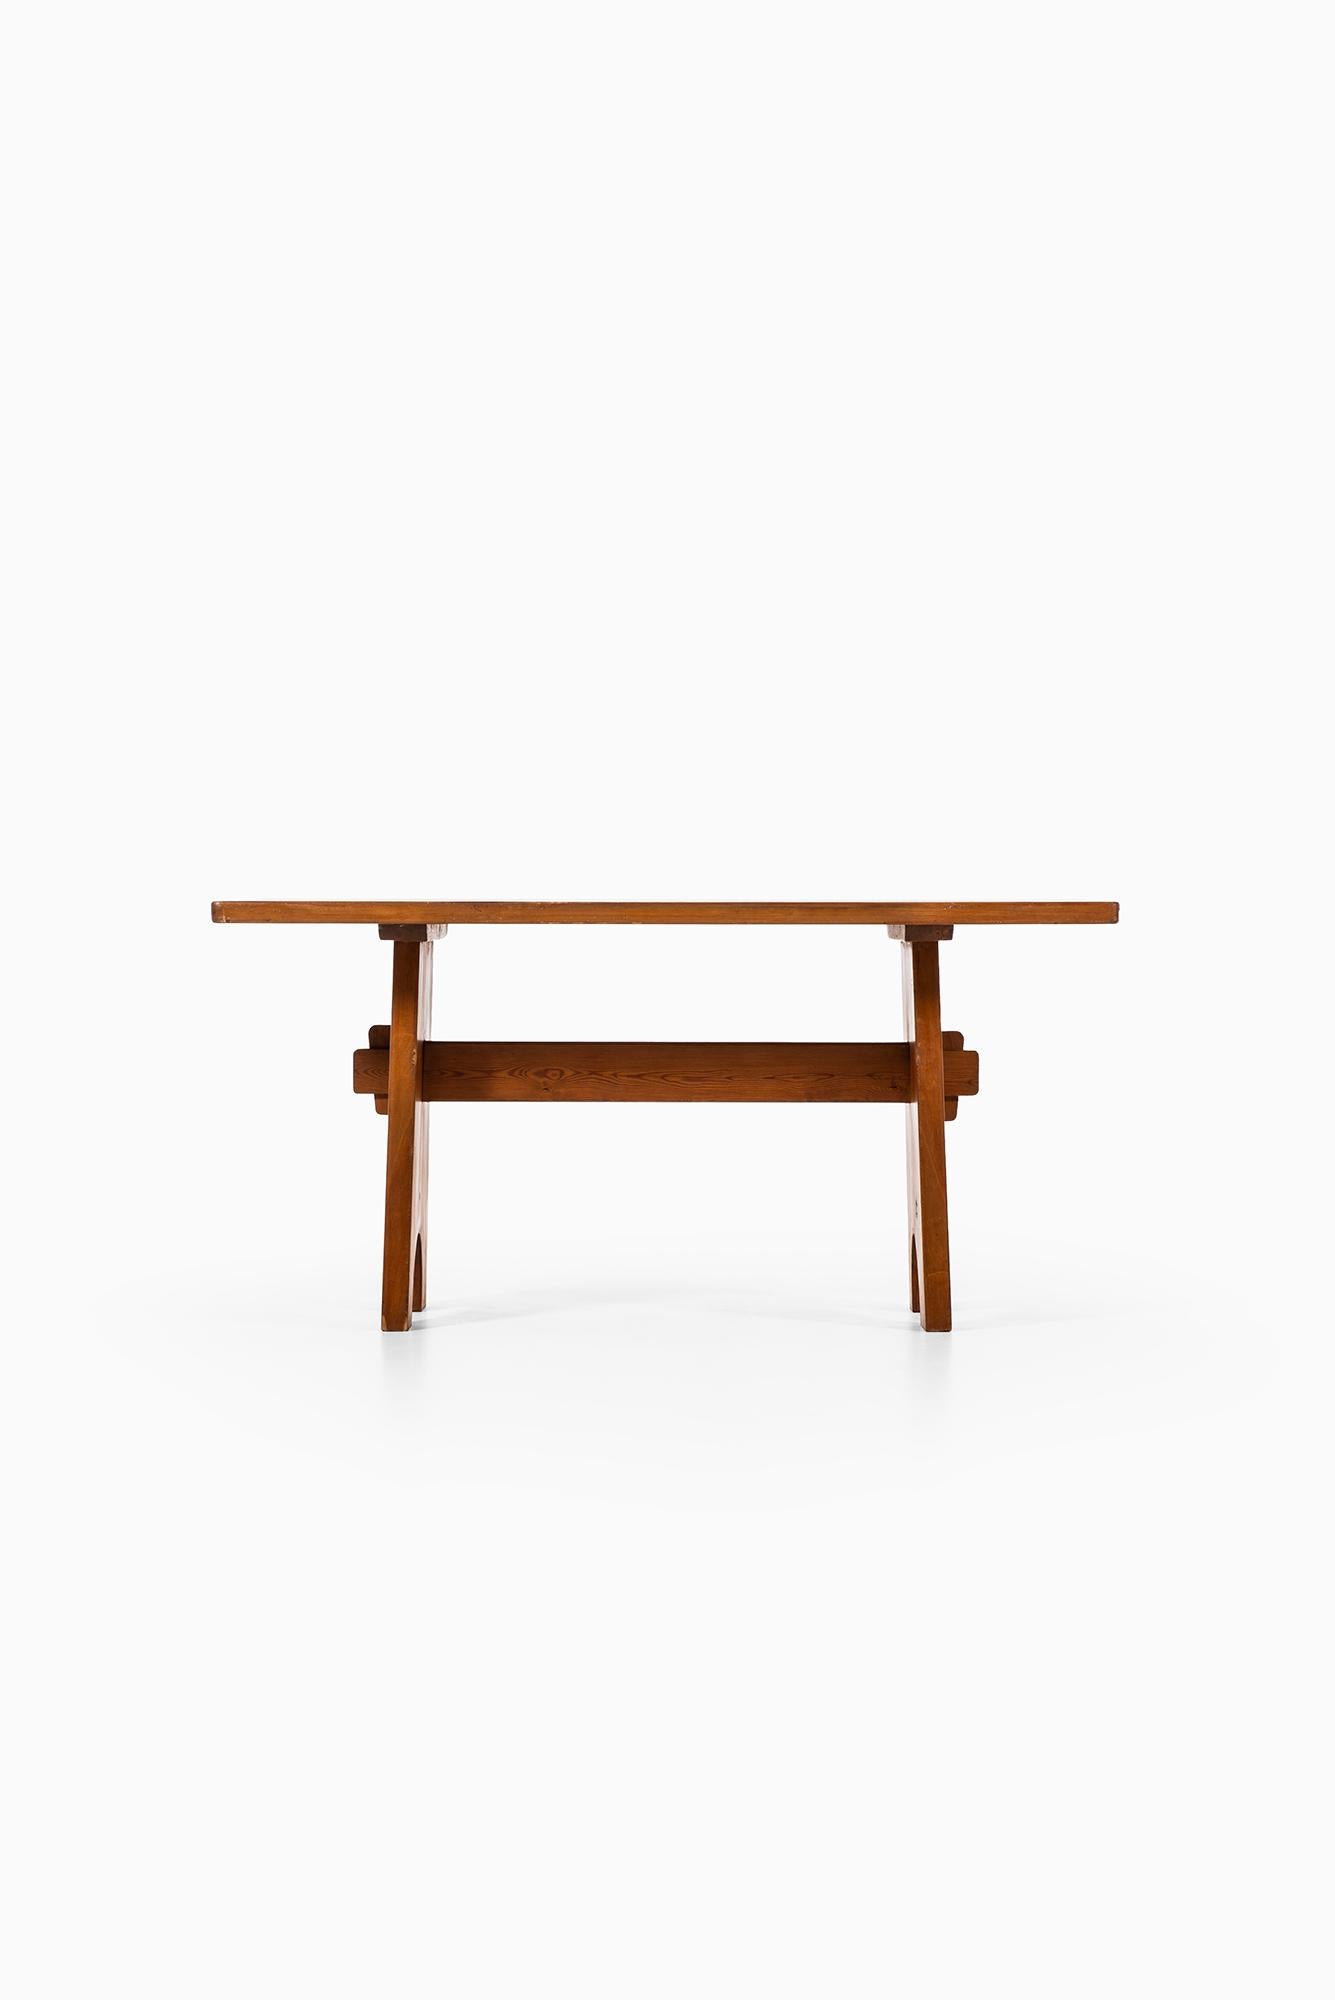 Rare dining table in the manner of Axel Einar Hjorth. Produced in Sweden.